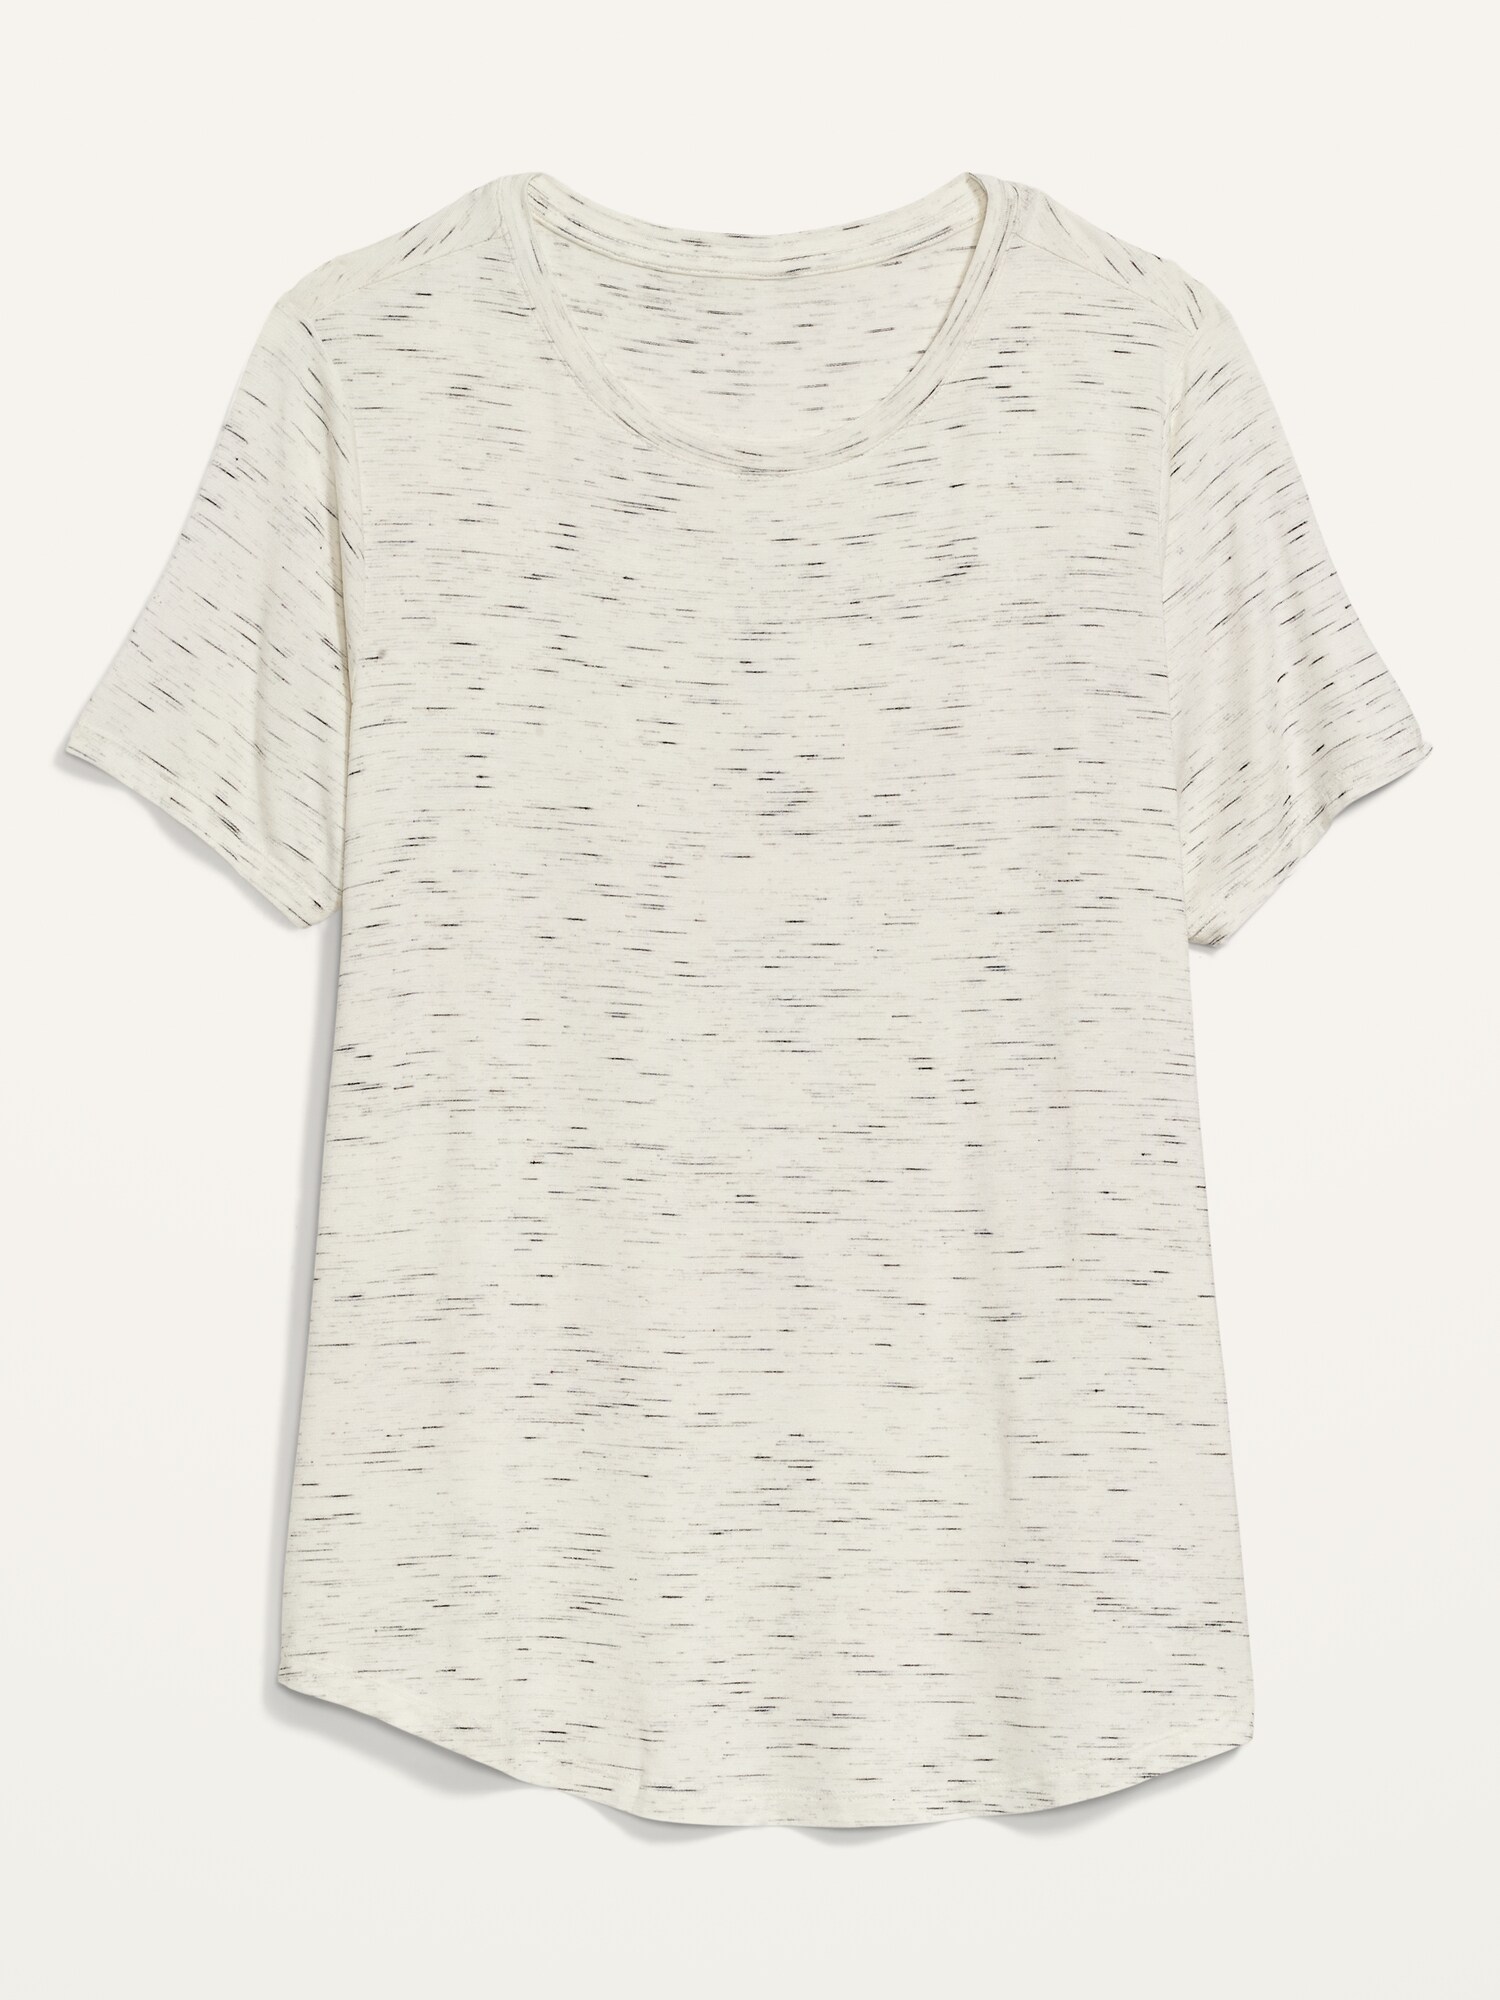 Luxe Space-Dye Crew-Neck T-Shirt for Women | Old Navy